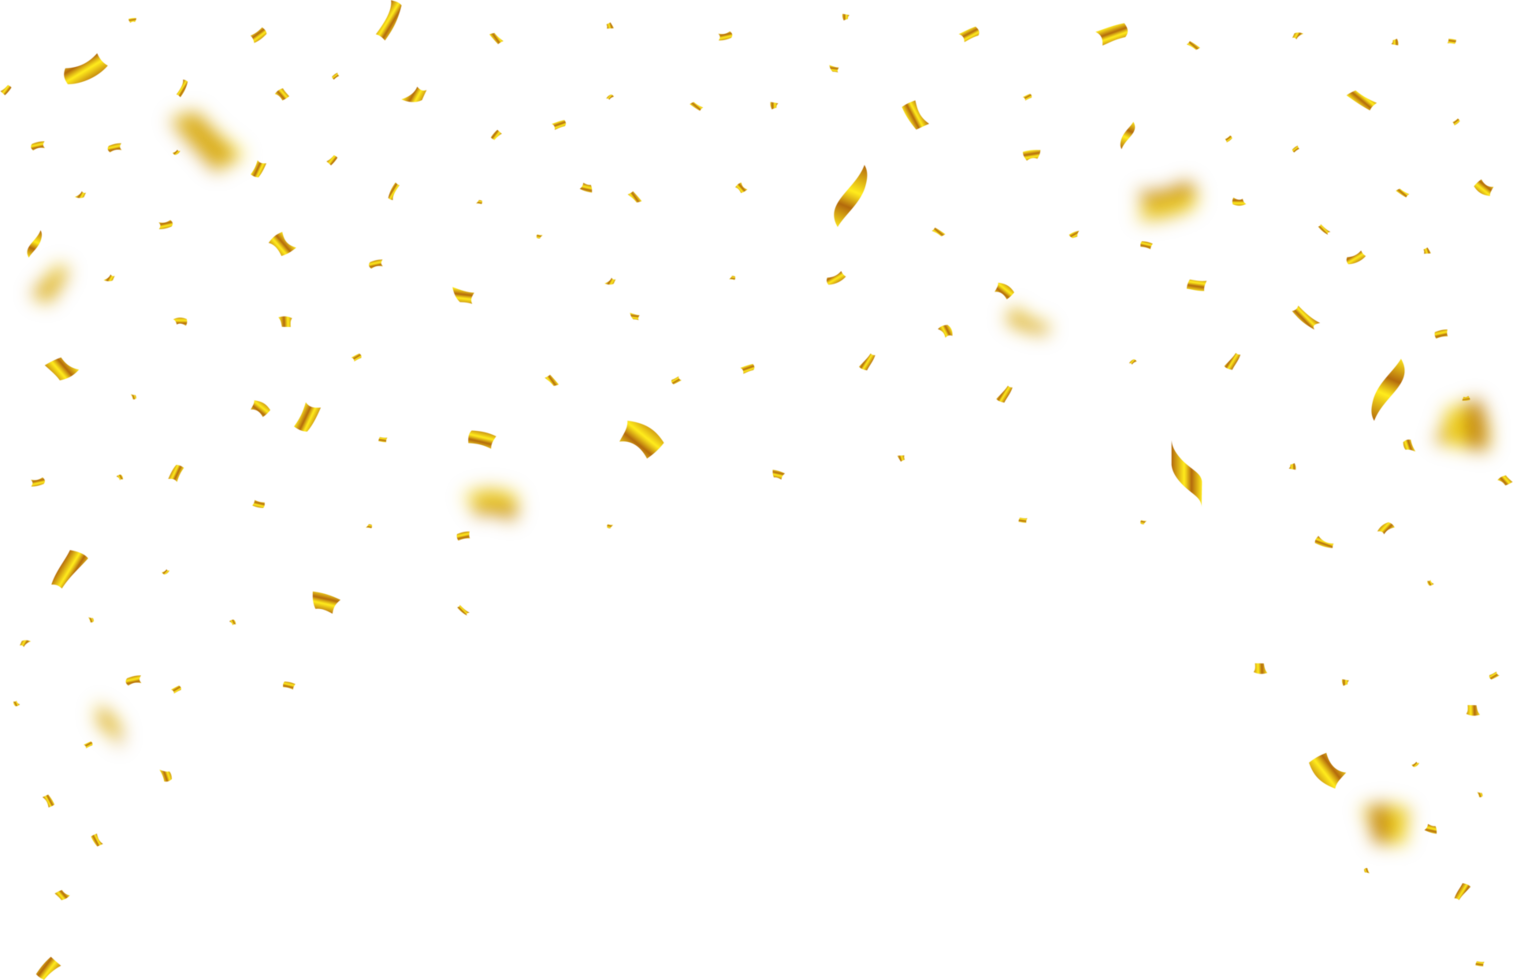 Golden confetti falling isolated on a transparent background. Carnival elements. Confetti PNG illustration for festival background. Golden party tinsel and confetti falling. Anniversary celebration.